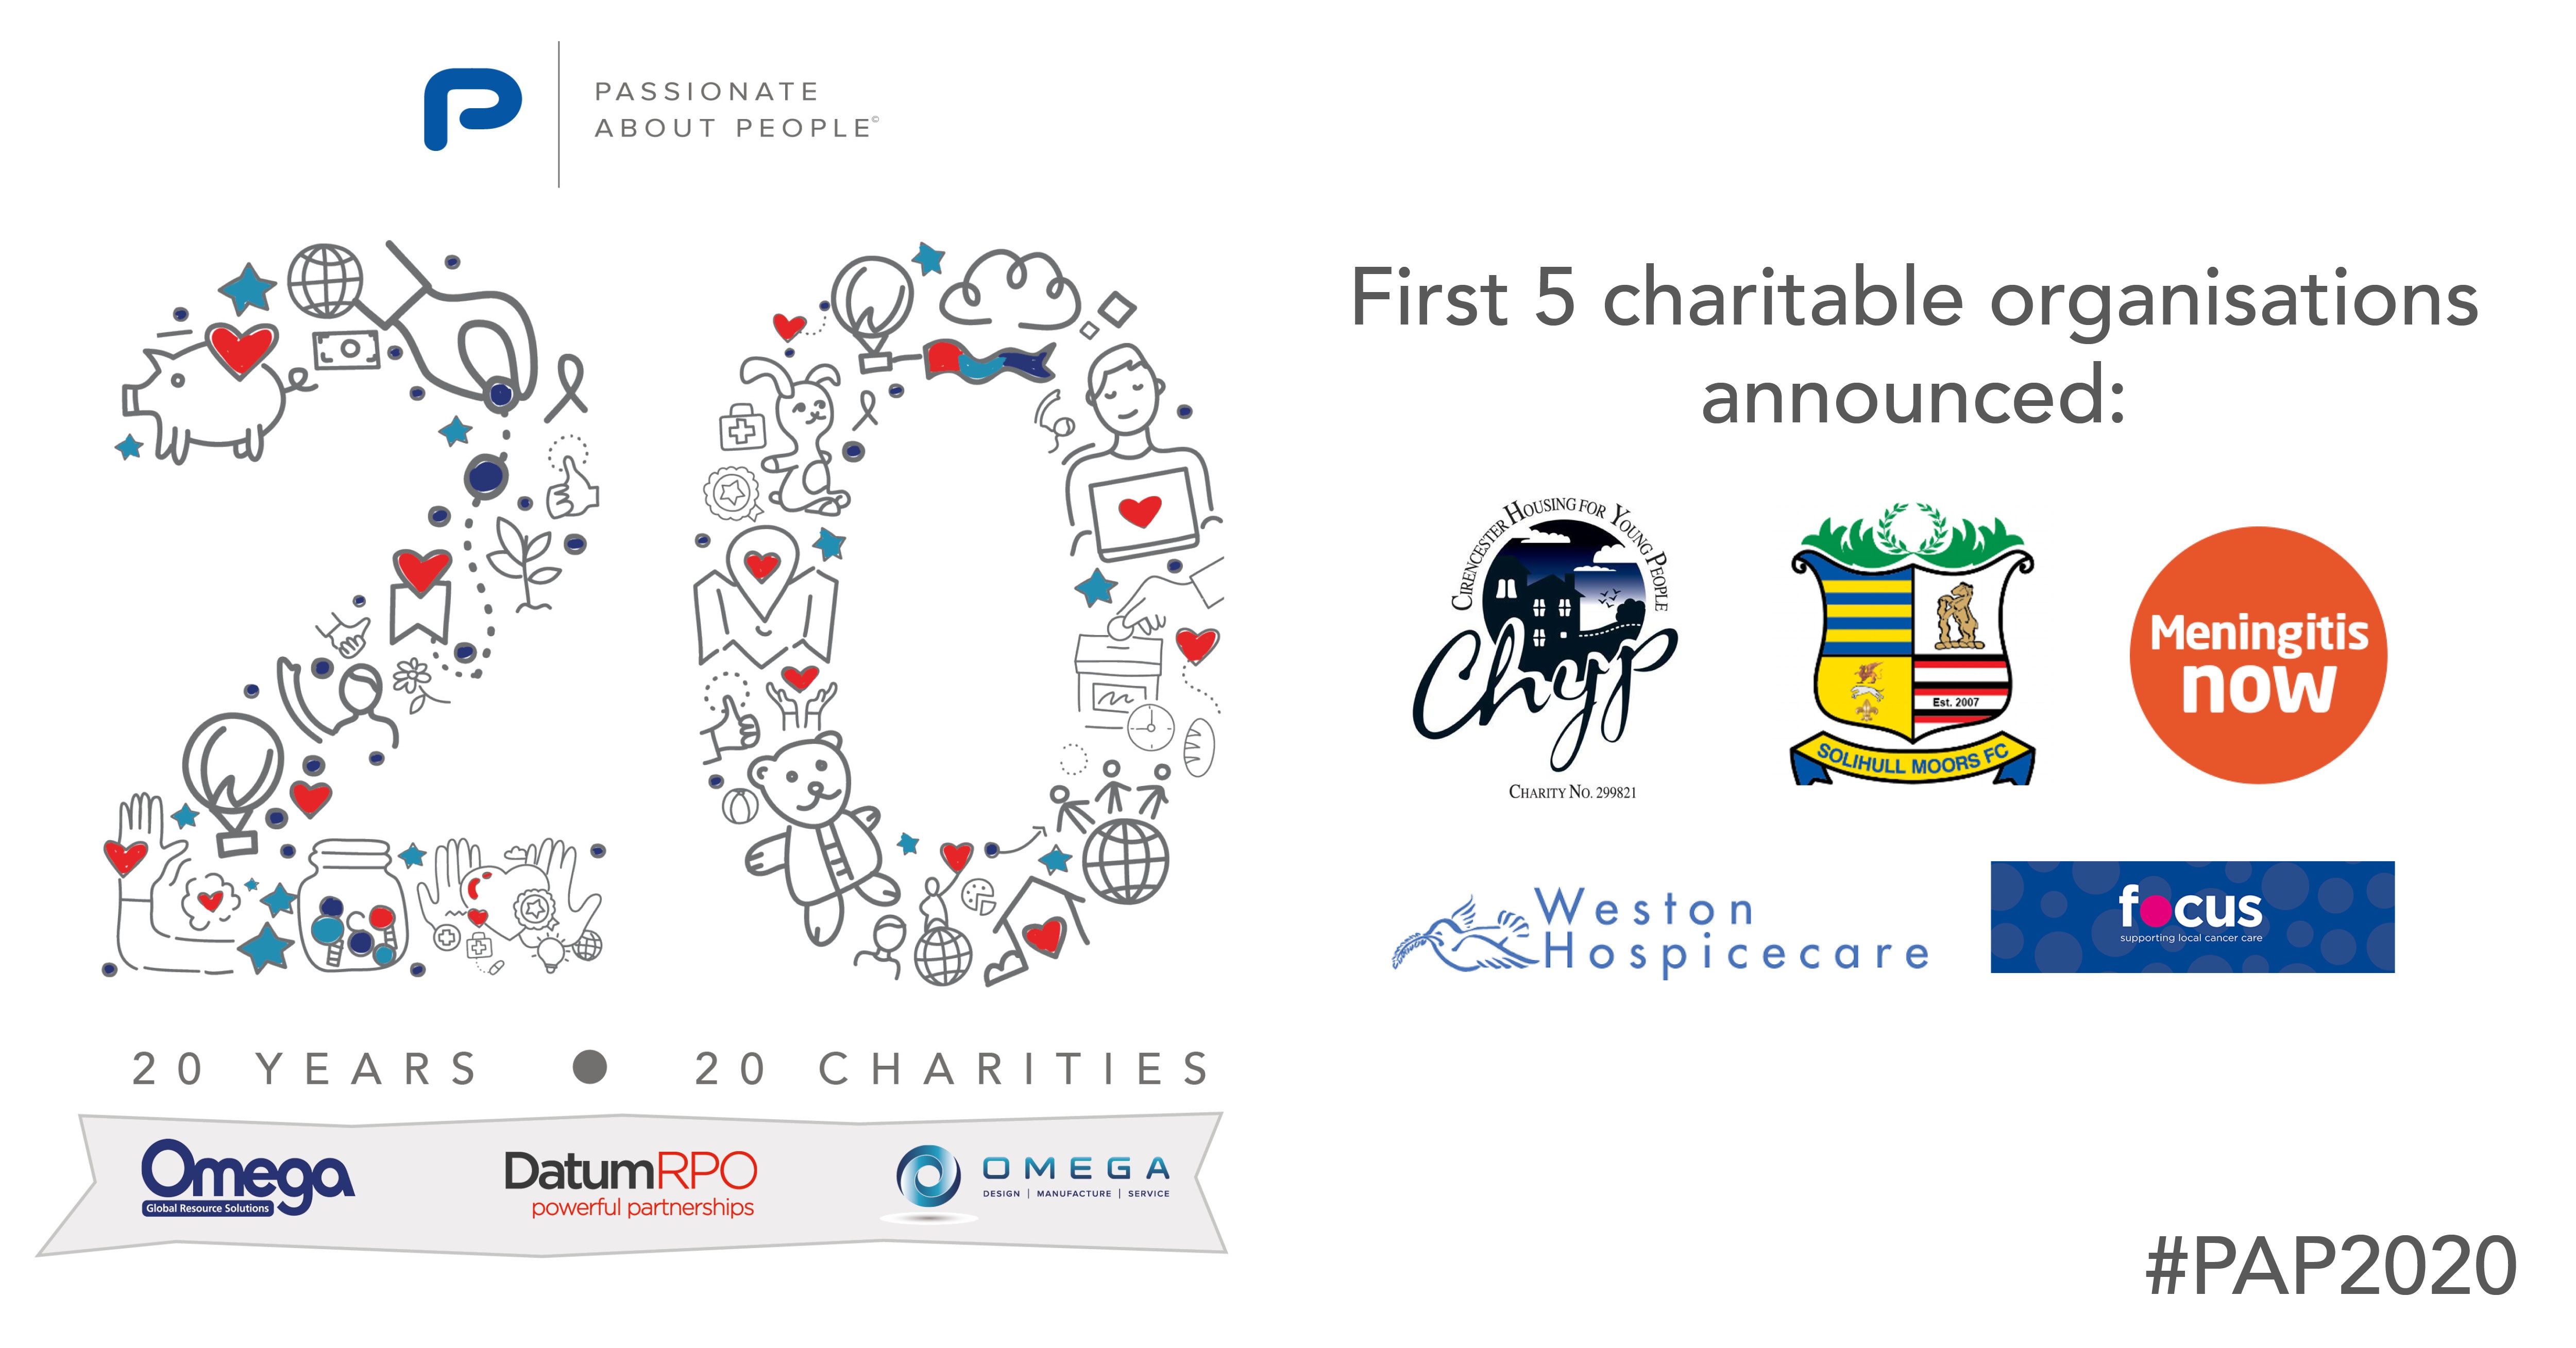 First 5 Charities Announced: Passionate About People 20th Year Anniversary - #PAP2020